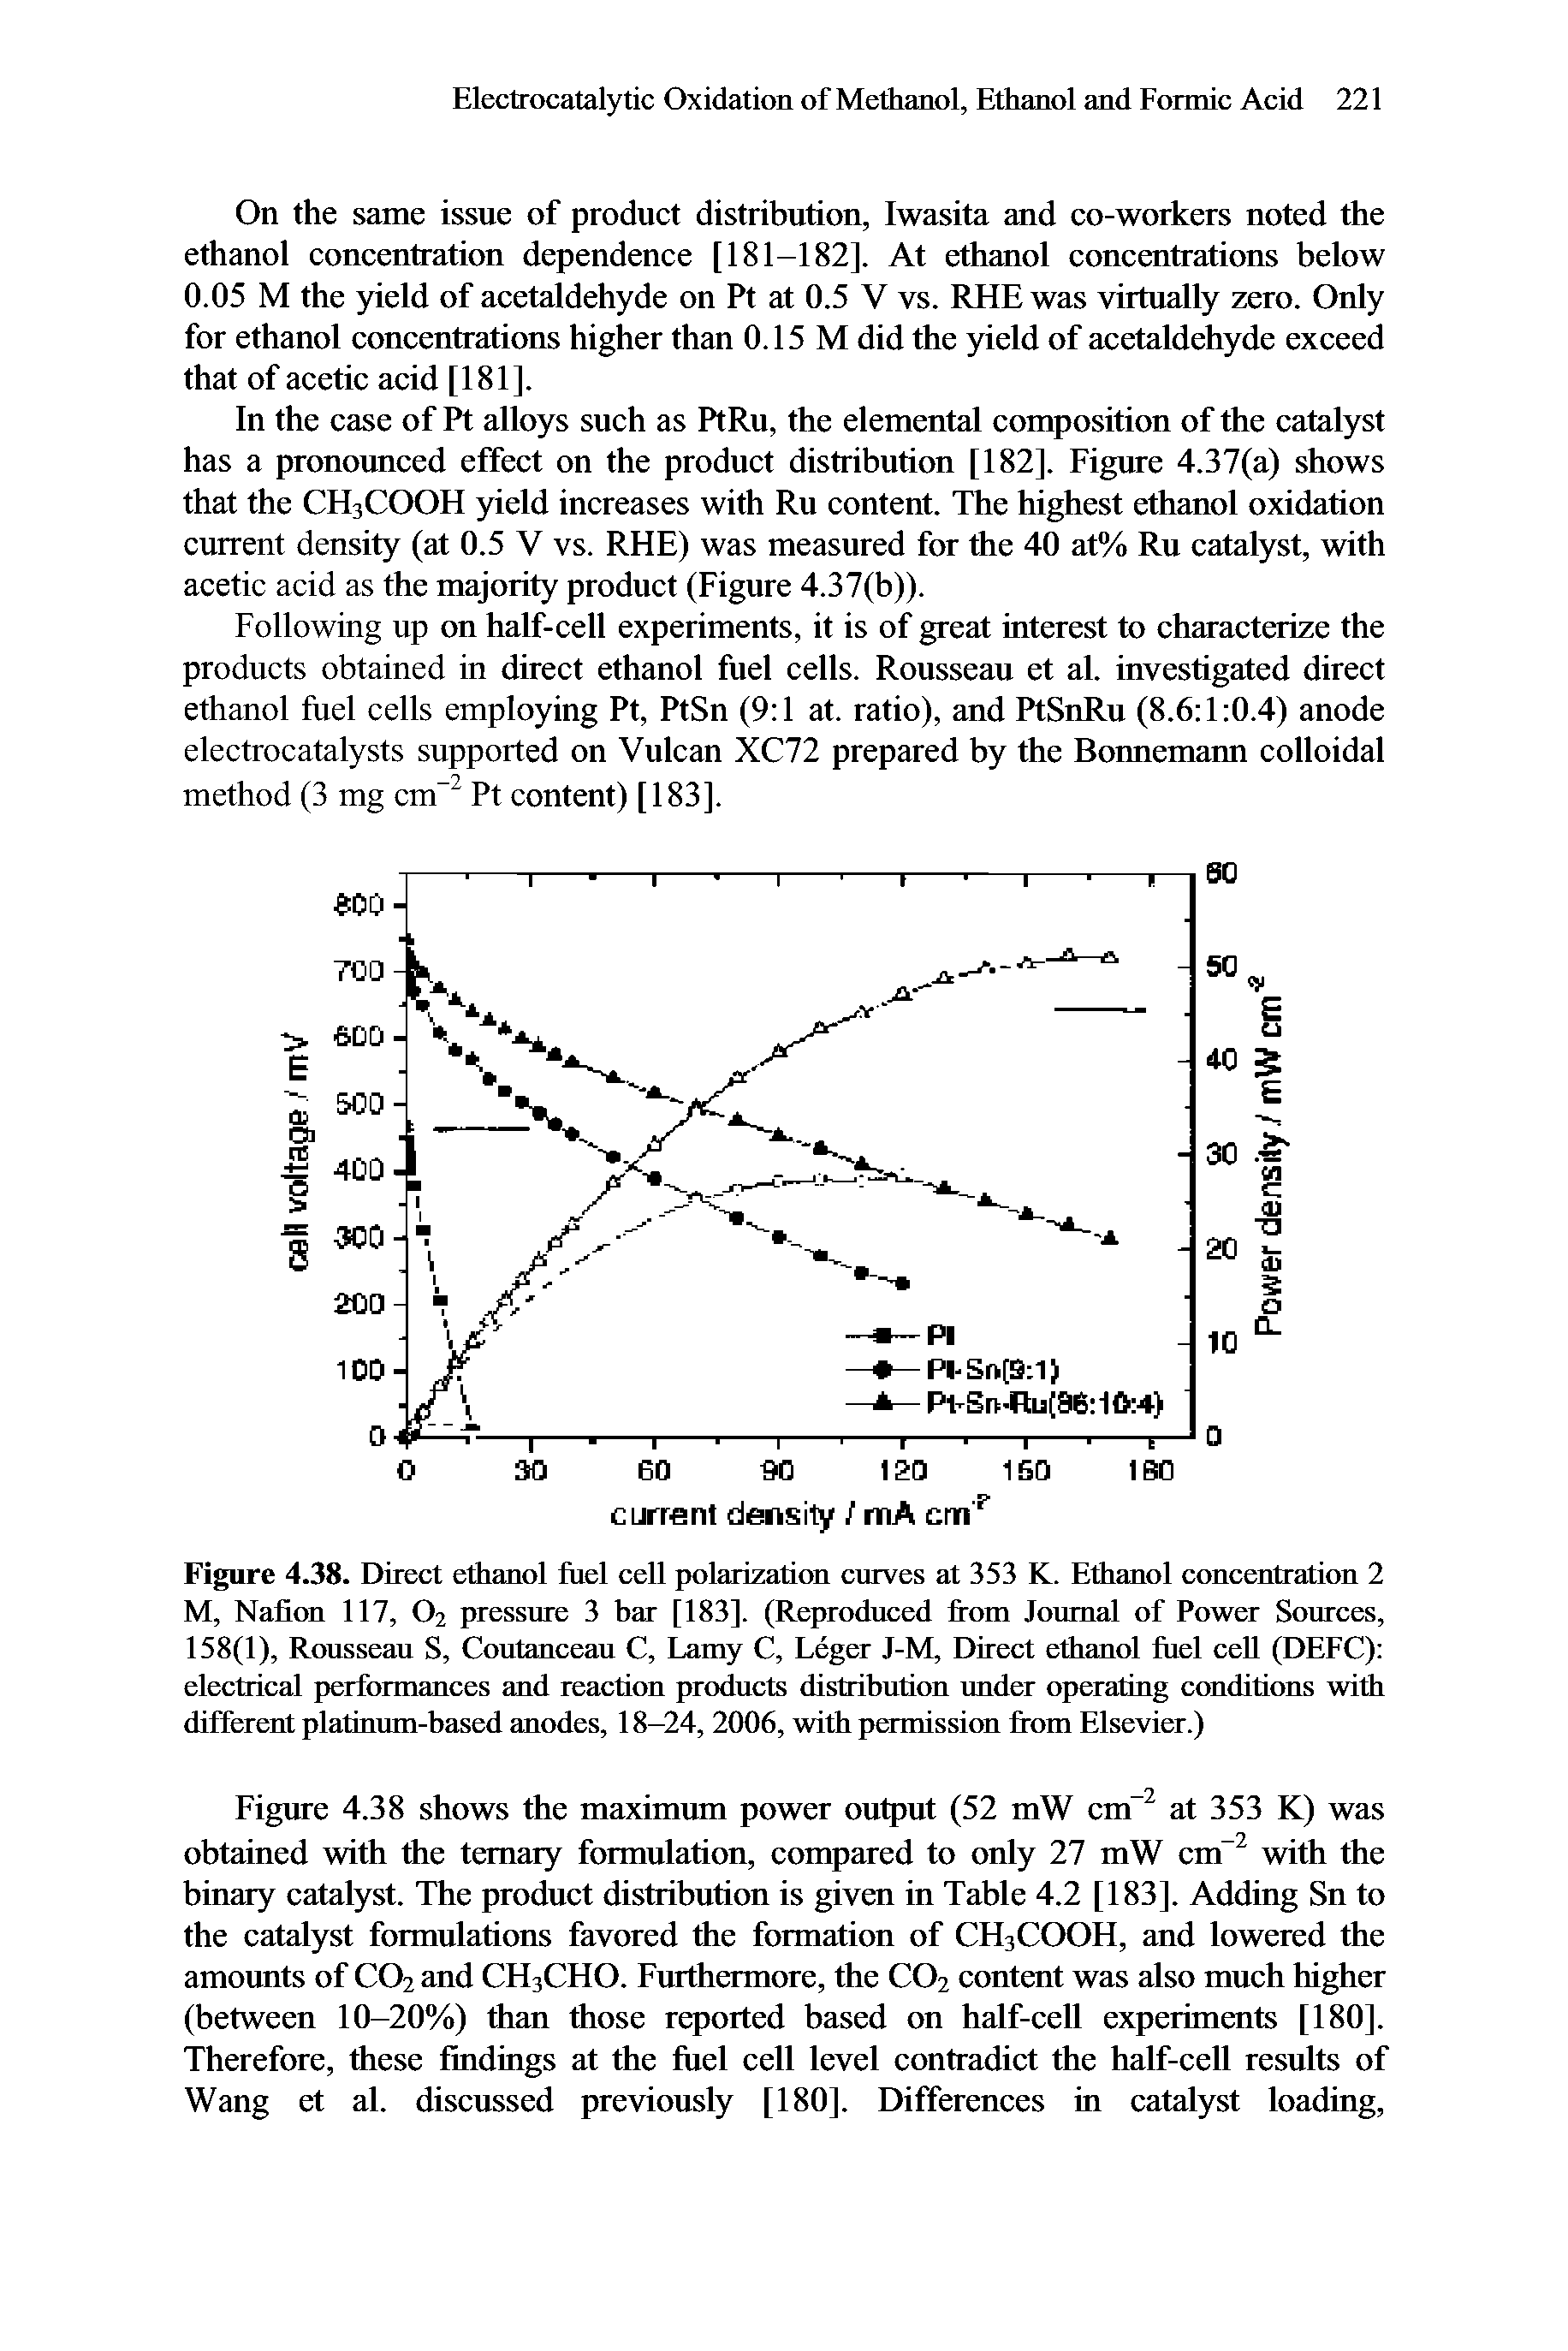 Figure 4.38. Direct ethanol fuel cell polarization curves at 353 K. Ethanol concentration 2 M, Nation 117, O2 pressure 3 bar [183]. (Reproduced from Journal of Power Sources, 158(1), Rousseau S, Coutanceau C, Lamy C, Leger J-M, Direct ethanol fuel cell (DEFC) electrical performances and reaction products distribution under operating conditions with different platinum-based anodes, 18-24, 2006, with permission from Elsevier.)...